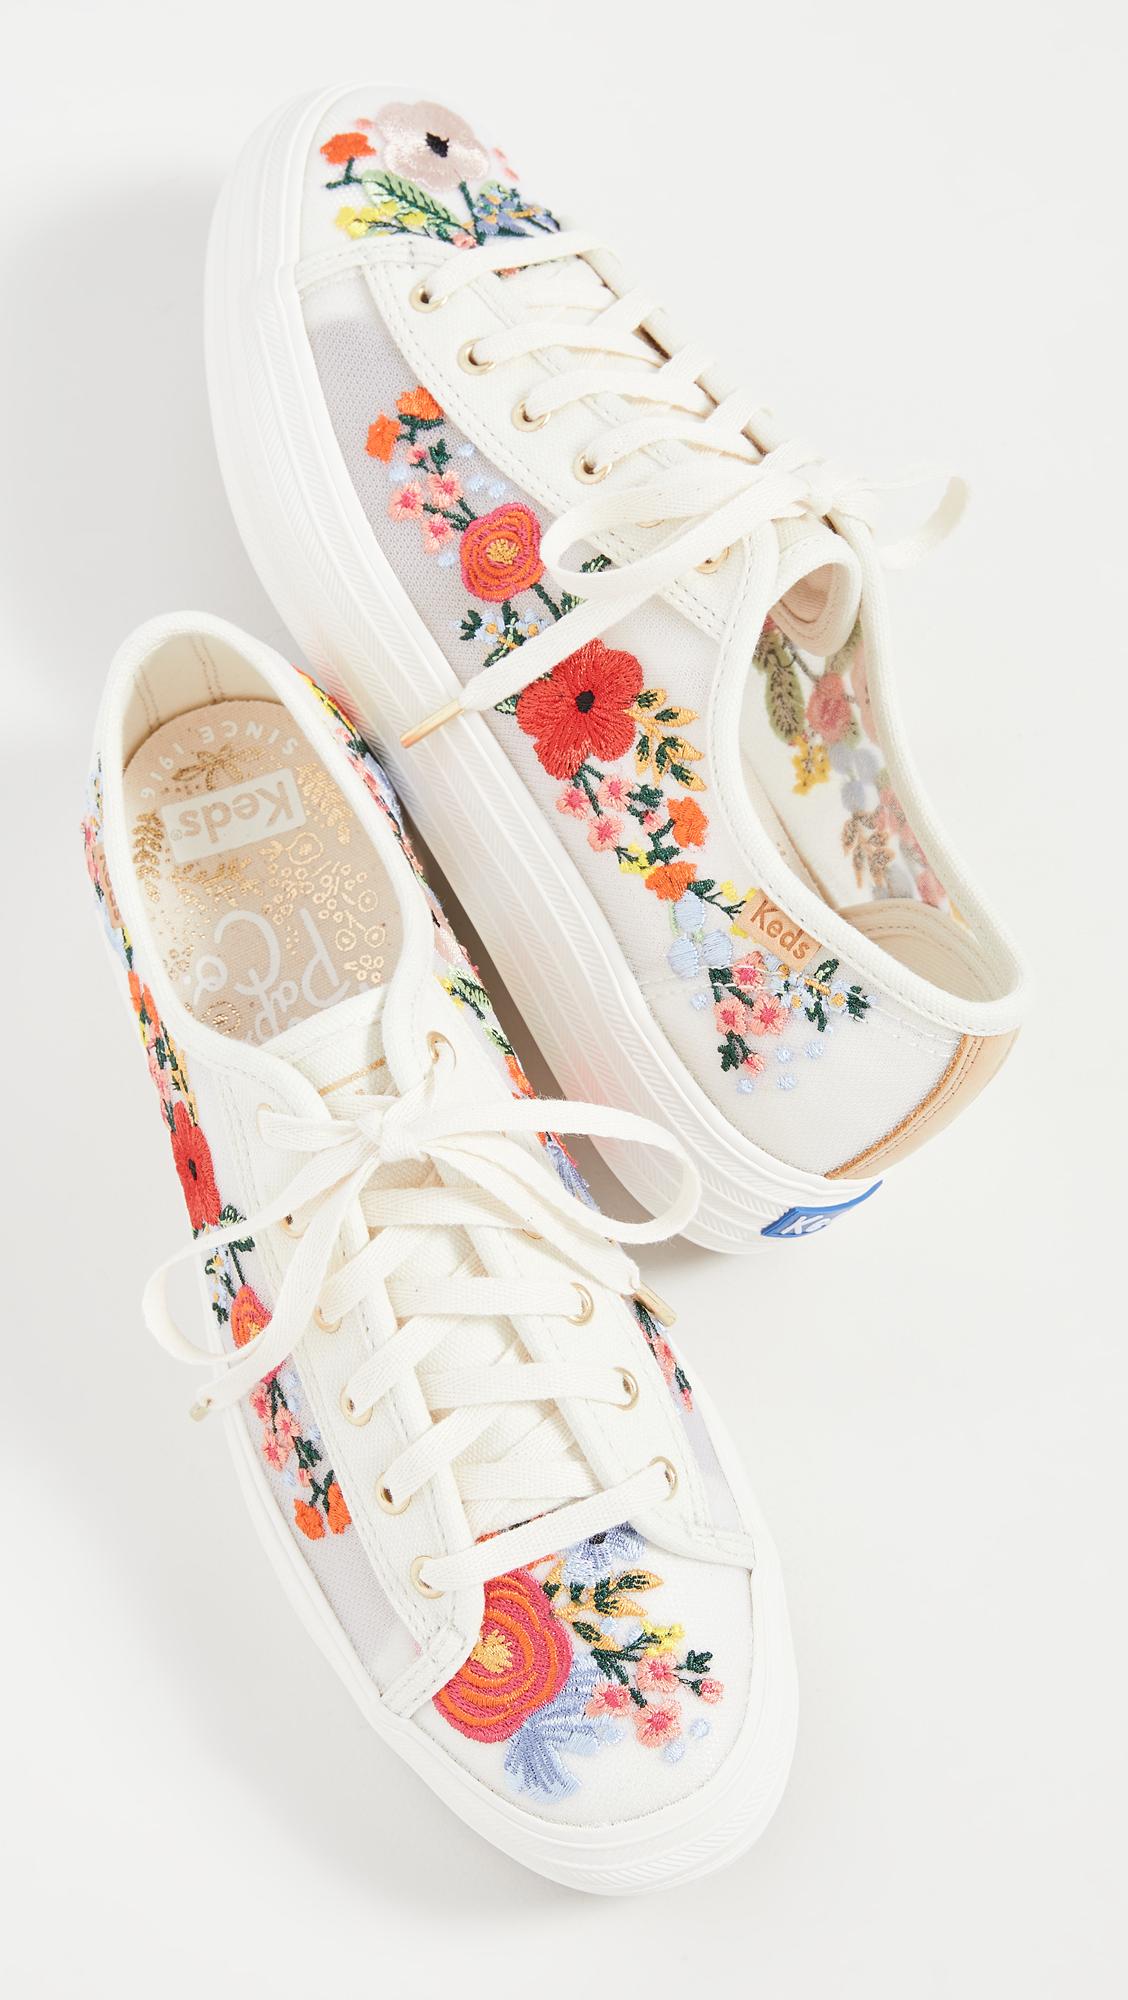 Keds Triple Kick Embroidered Mesh Sneakers in White | Lyst